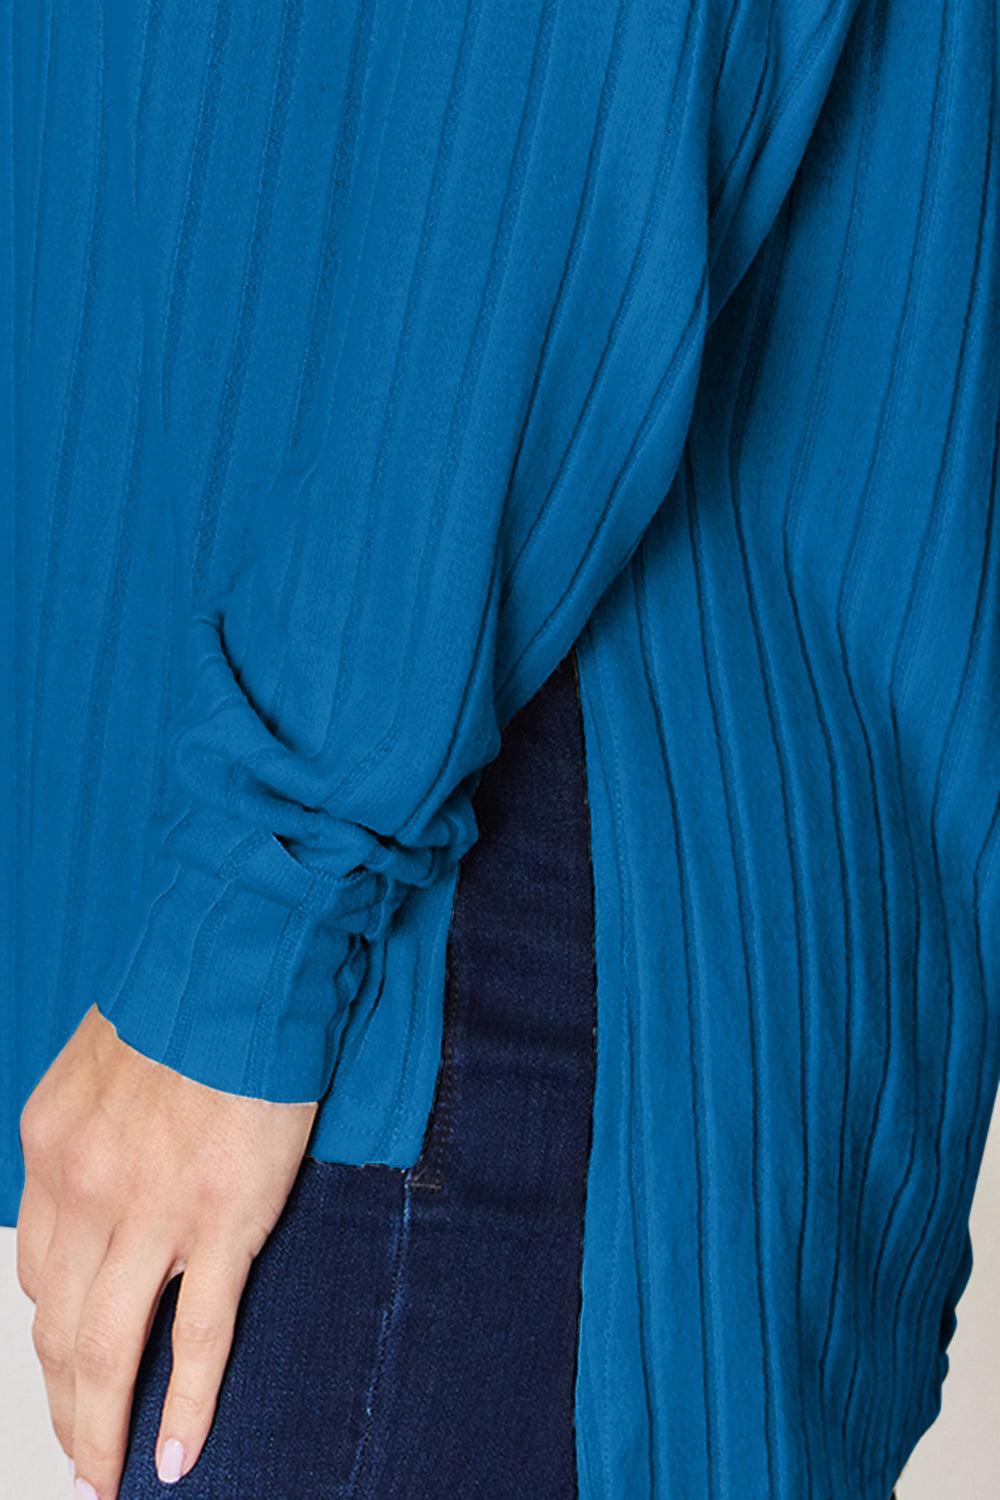 a close up of a person wearing a blue shirt